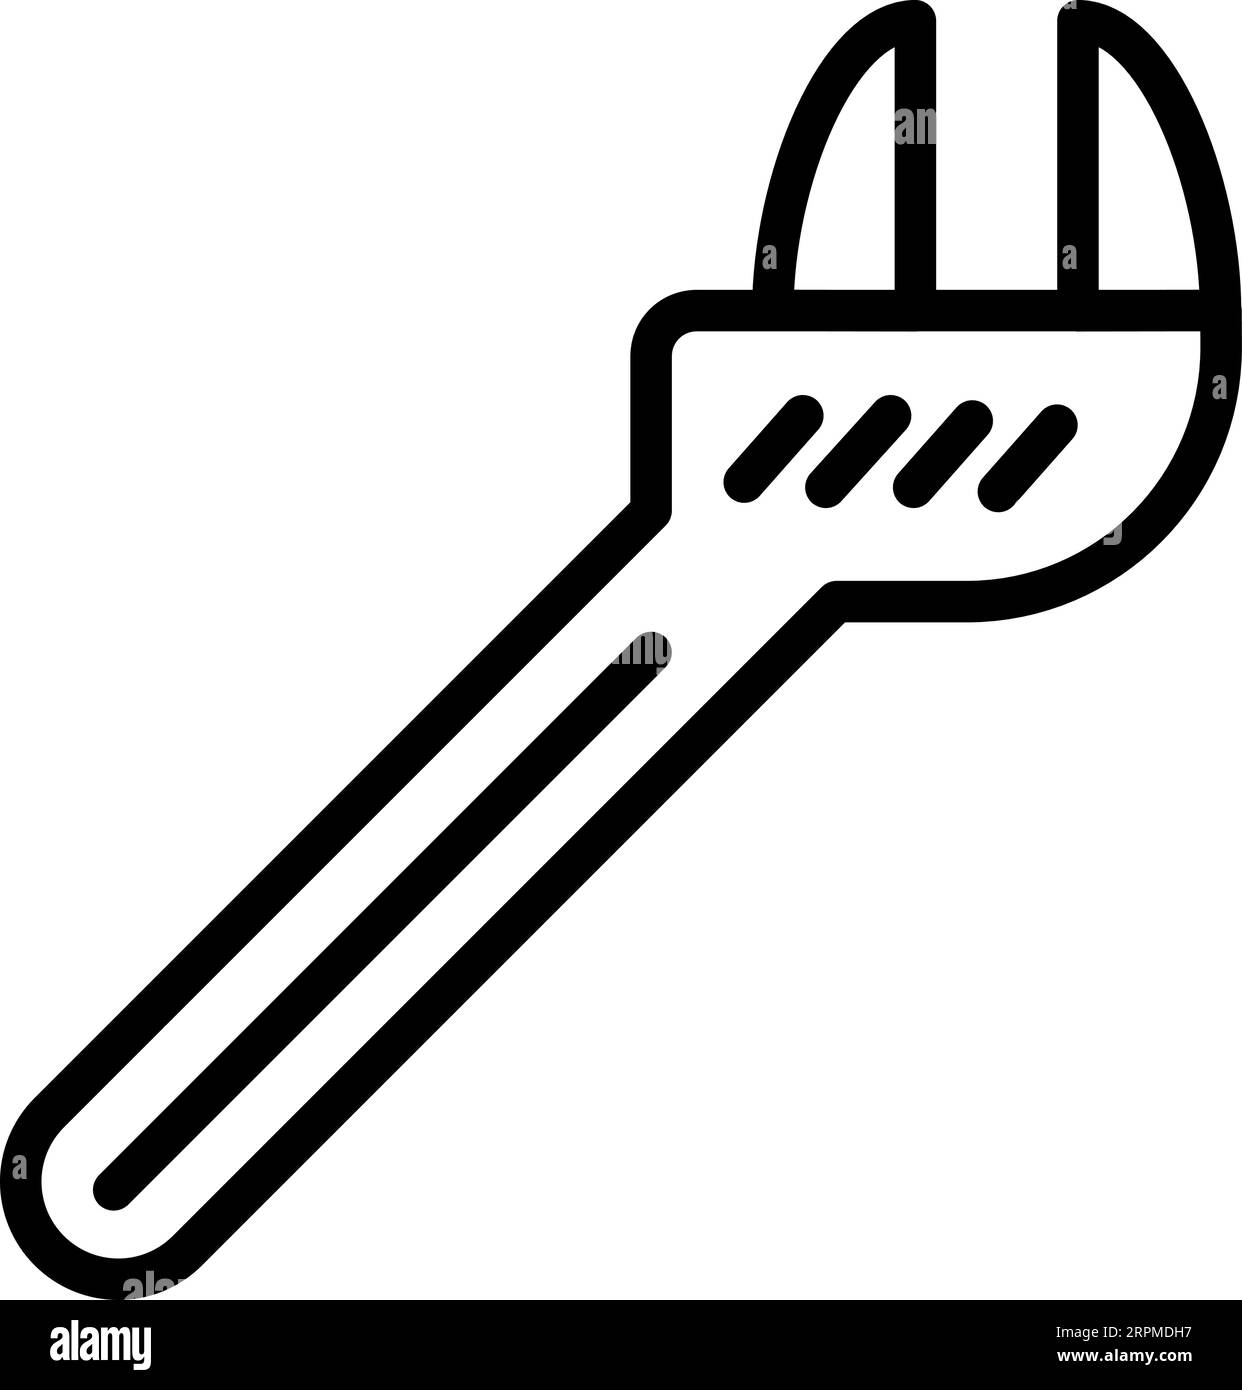 Line wrench icon as an editable outline for your design Stock Vector